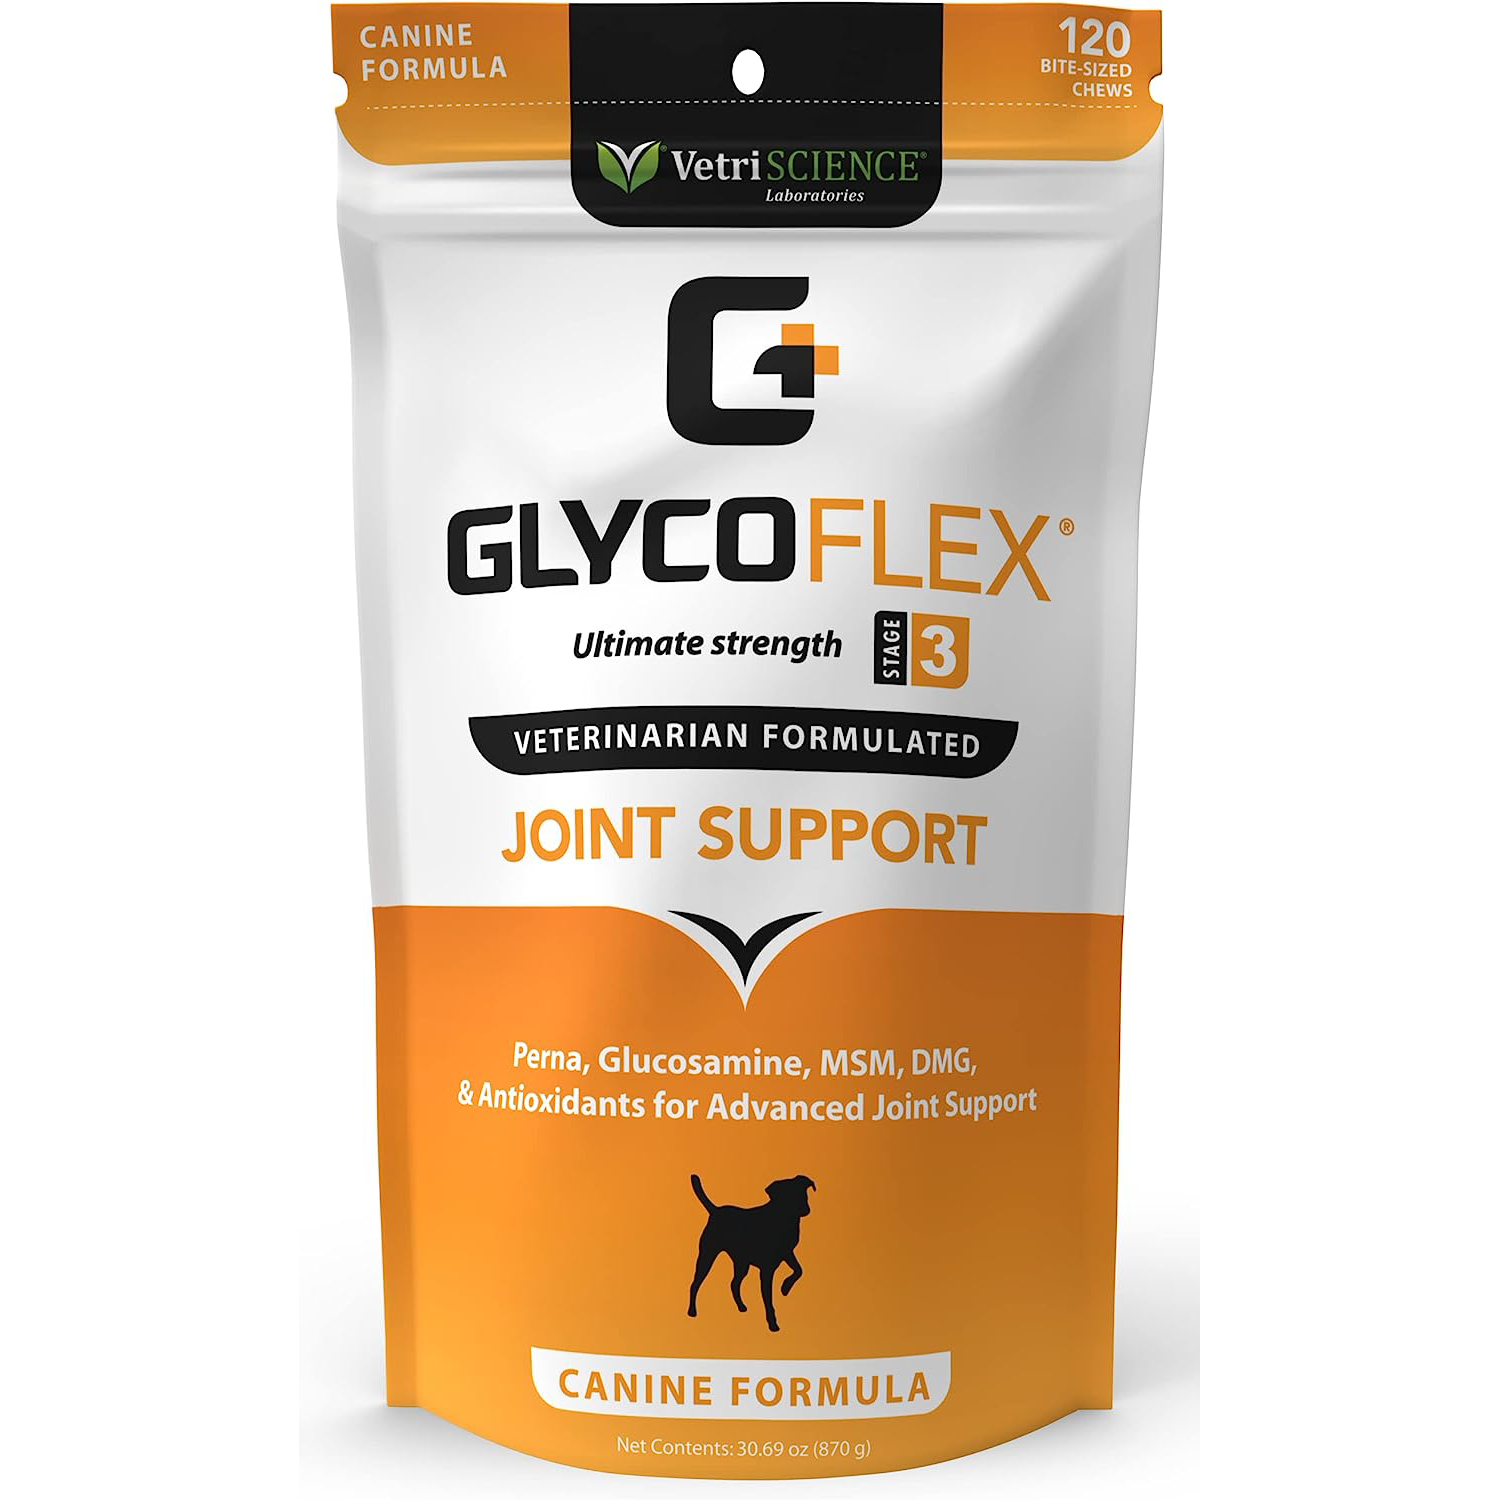 VETRISCIENCE Glycoflex 3 Clinically Proven Hip And Joint Supplement With Glucosamine For Dogs